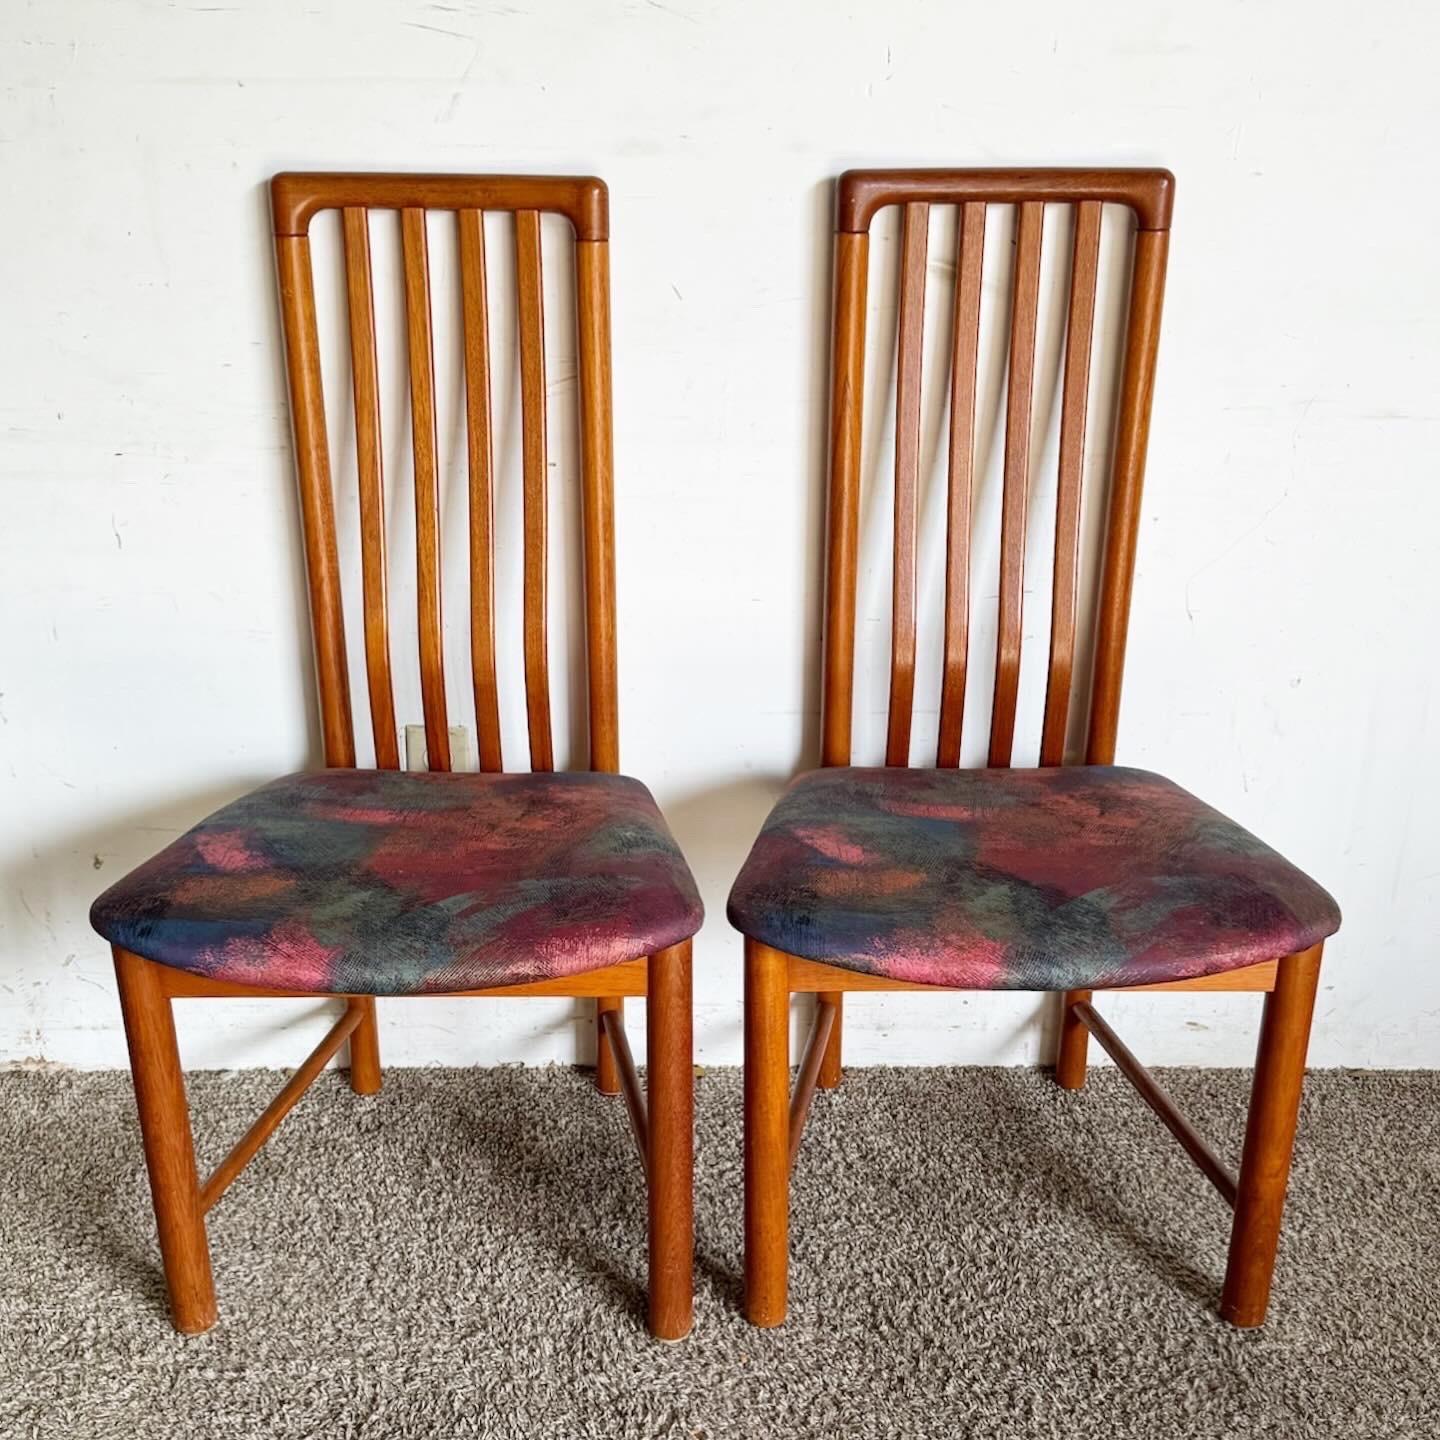 Danish Mid Century Modern Dining Chairs by Boltinge - Set of 4 For Sale 2